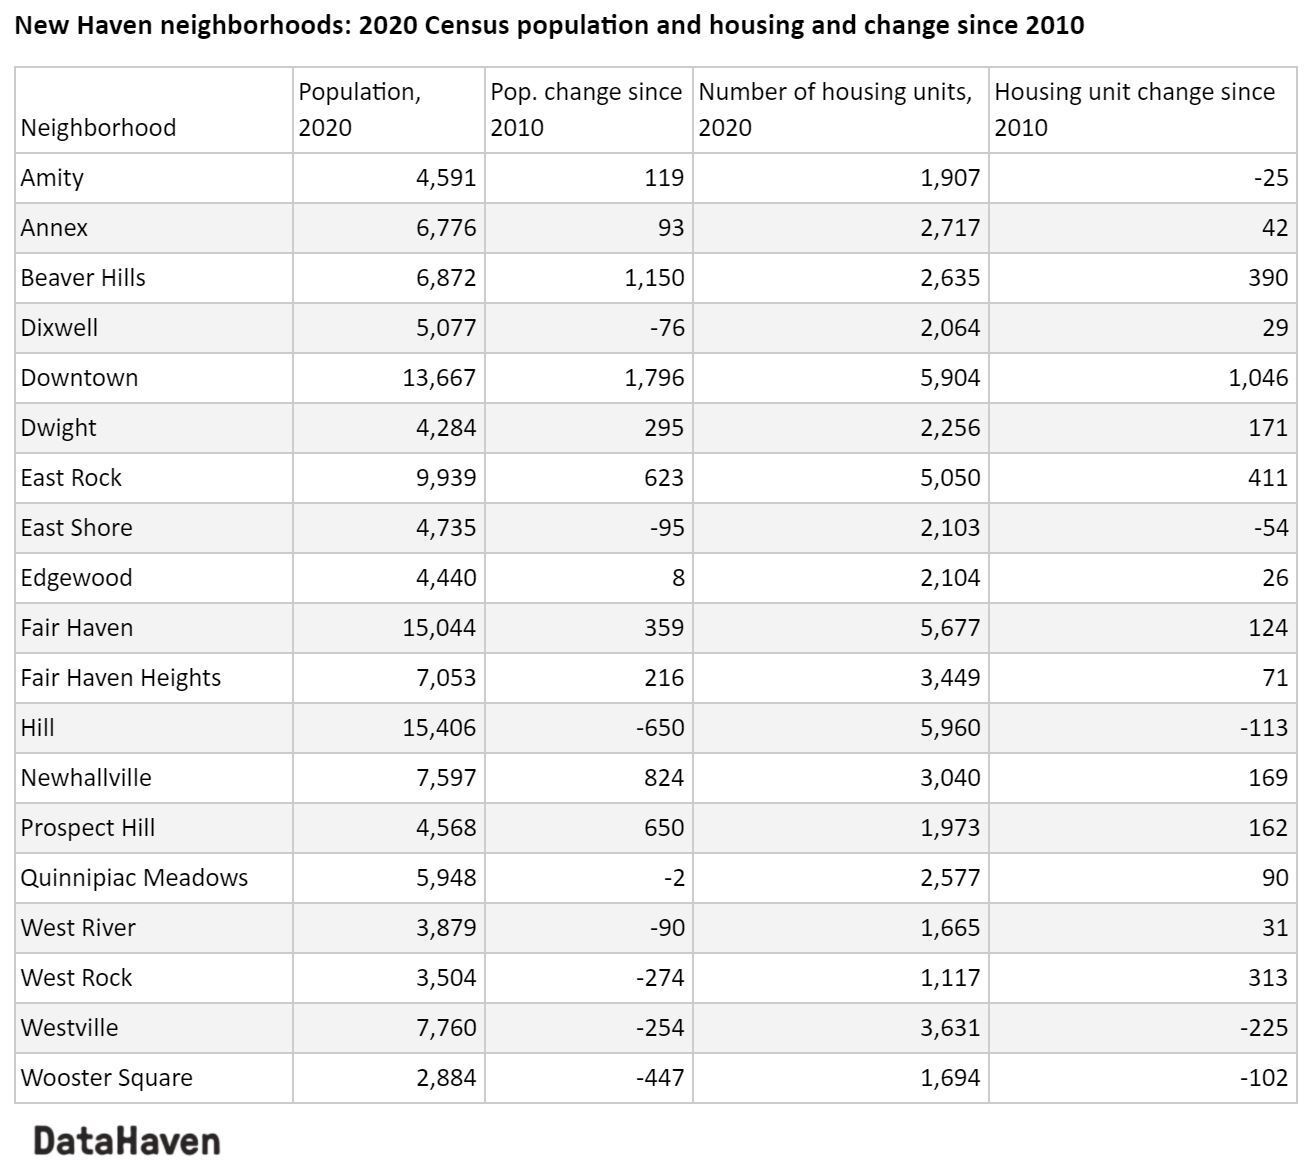 Changes in New Haven neighborhoods 2010 to 2020 census table